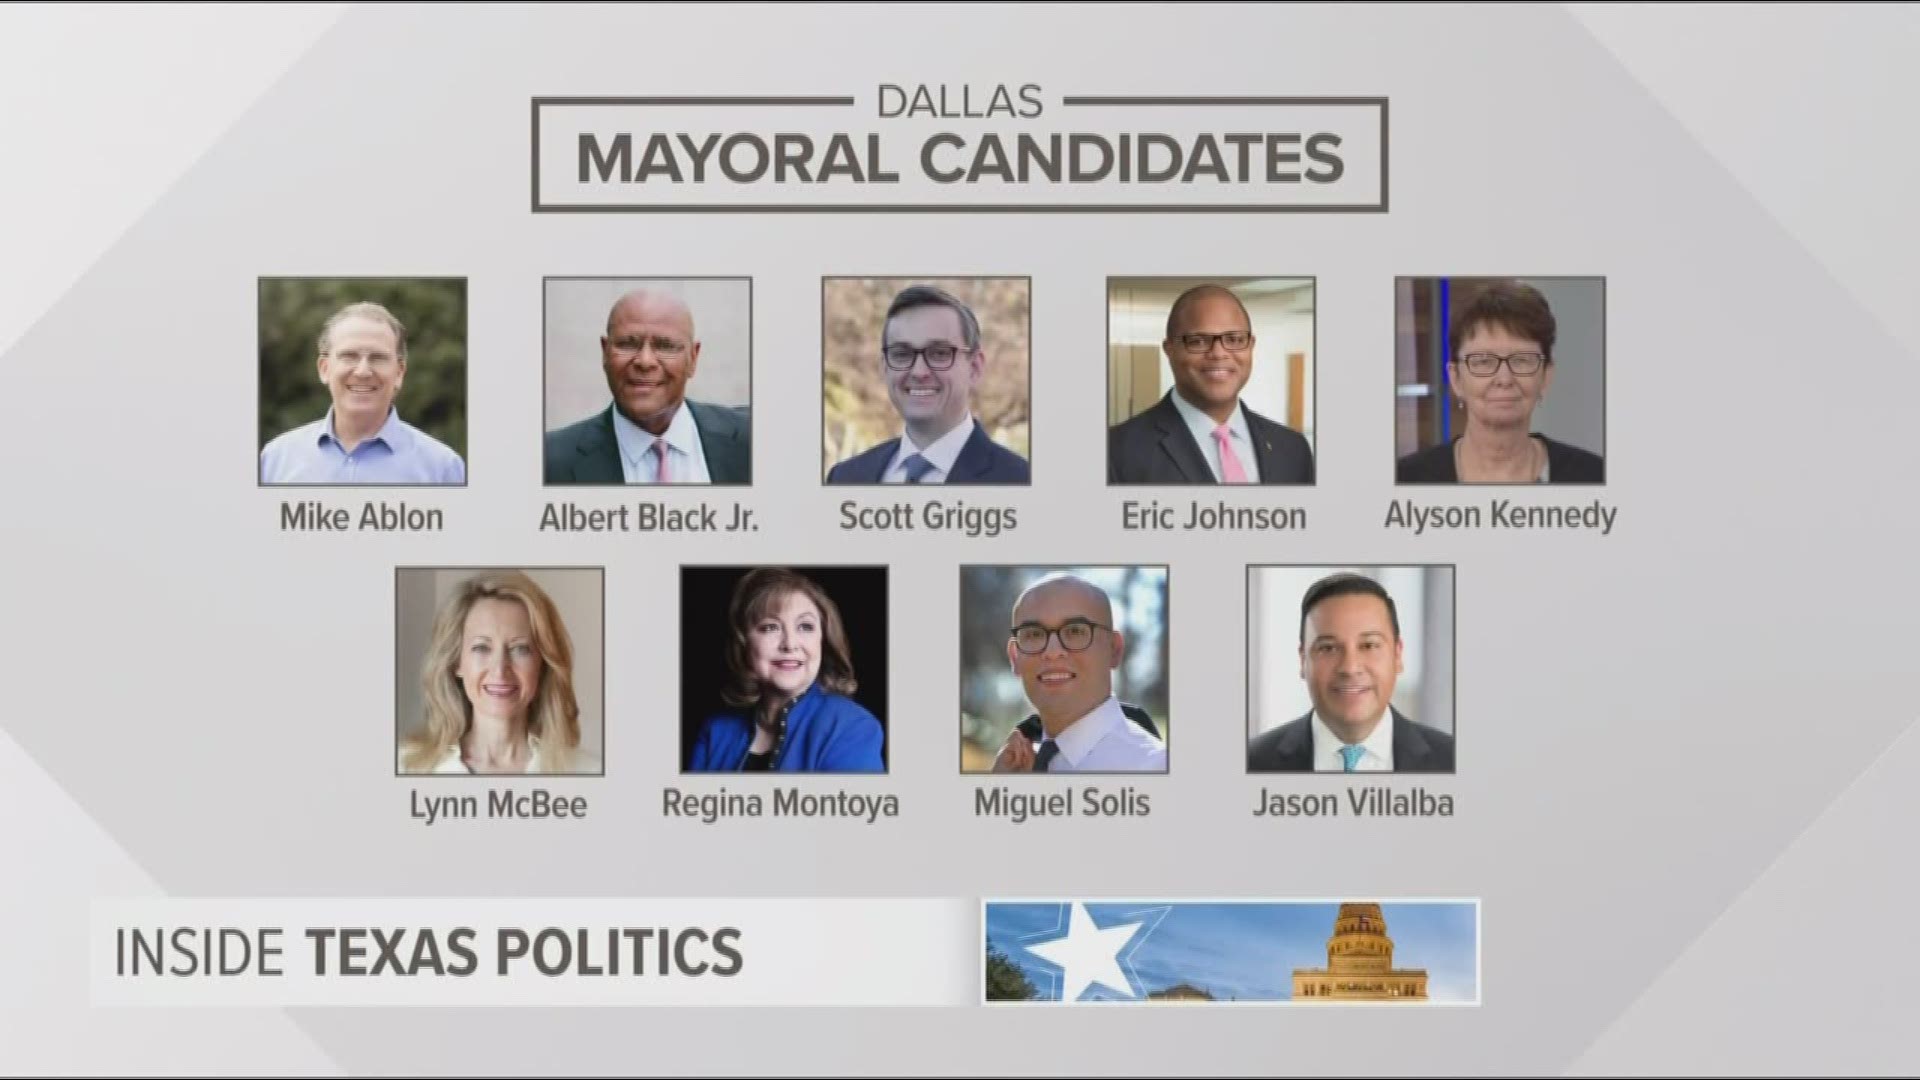 The number of candidates running for Dallas Mayor is nine. All of them will or have appeared on Inside Texas Politics to introduce themselves to voters and explain their vision for Dallas.